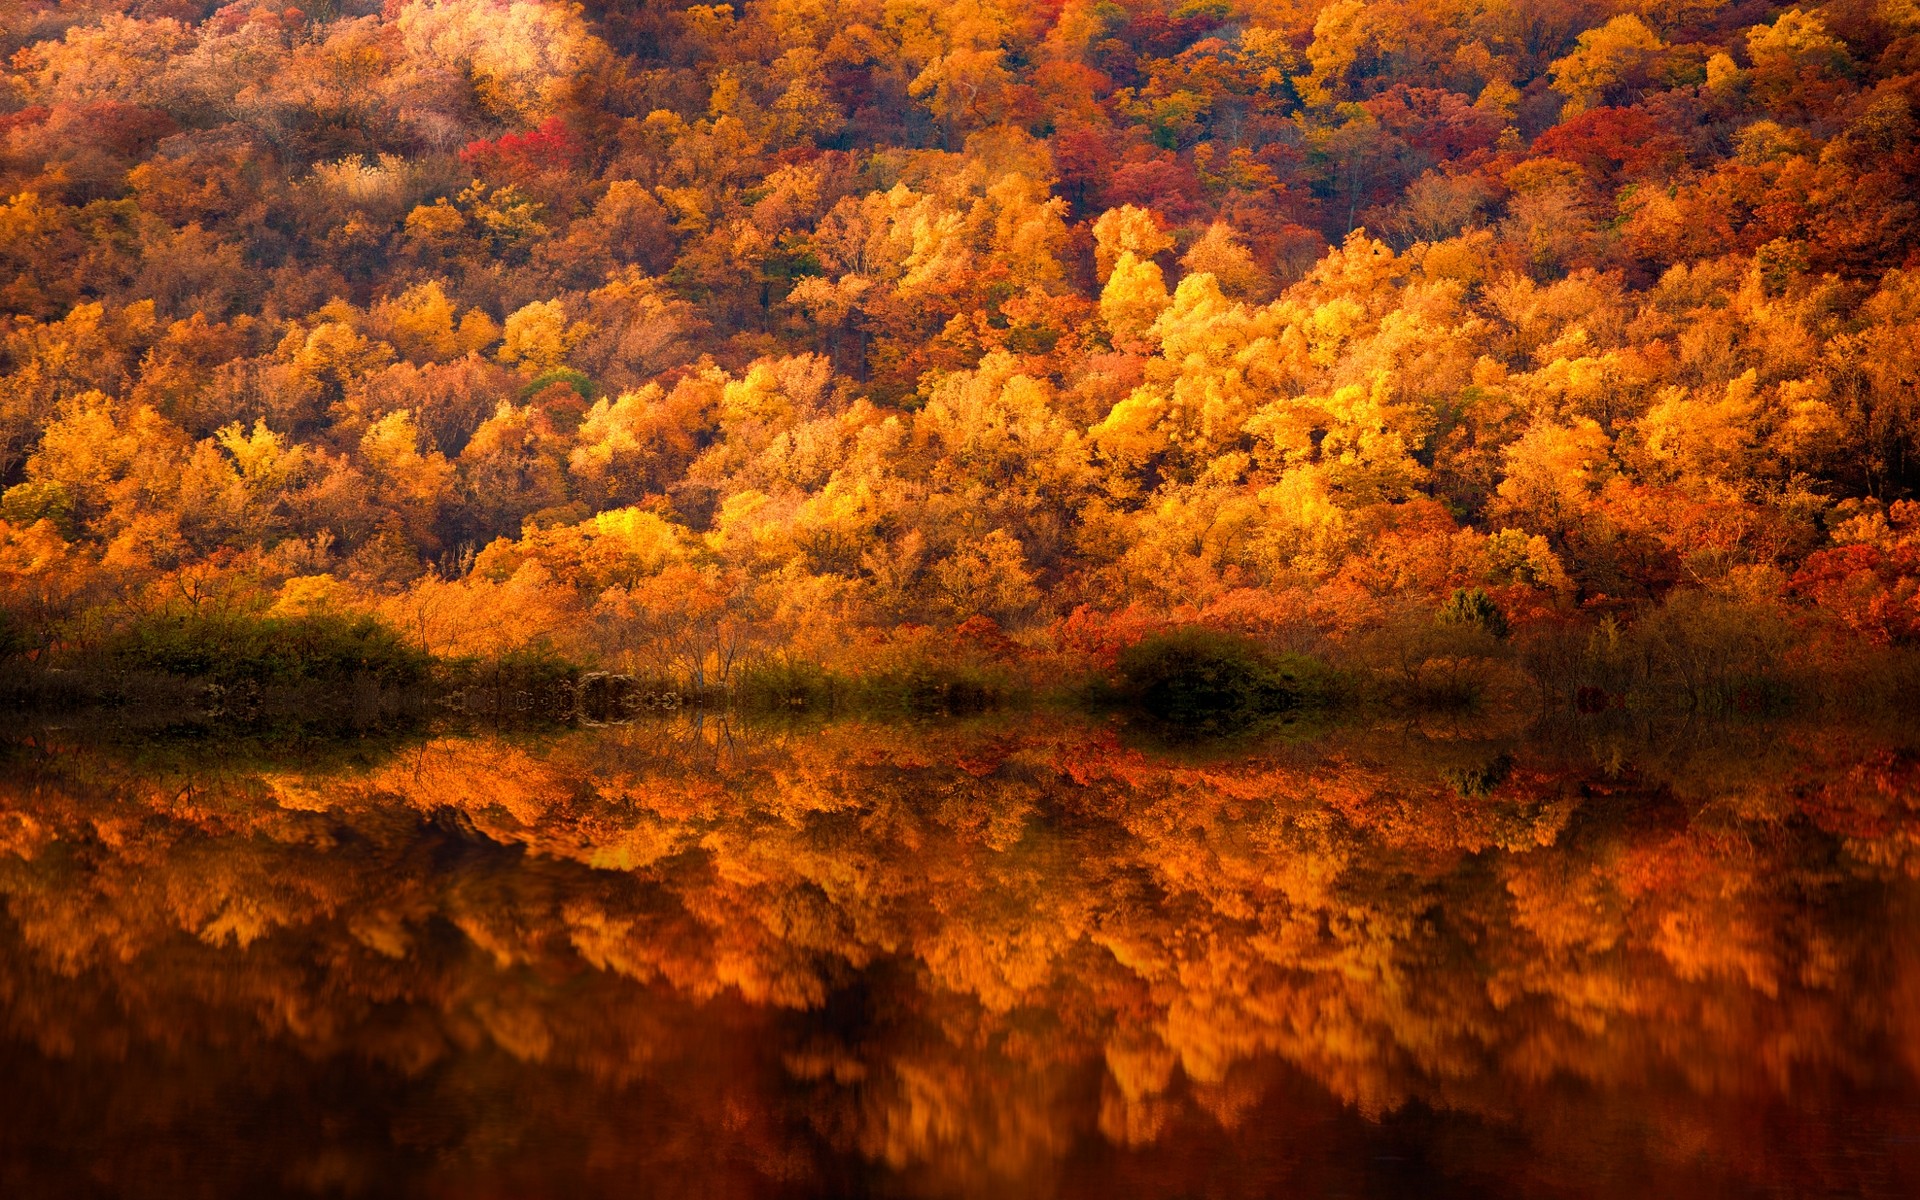 General 1920x1200 nature landscape fall forest lake reflection yellow amber trees shrubs Pennsylvania USA plants